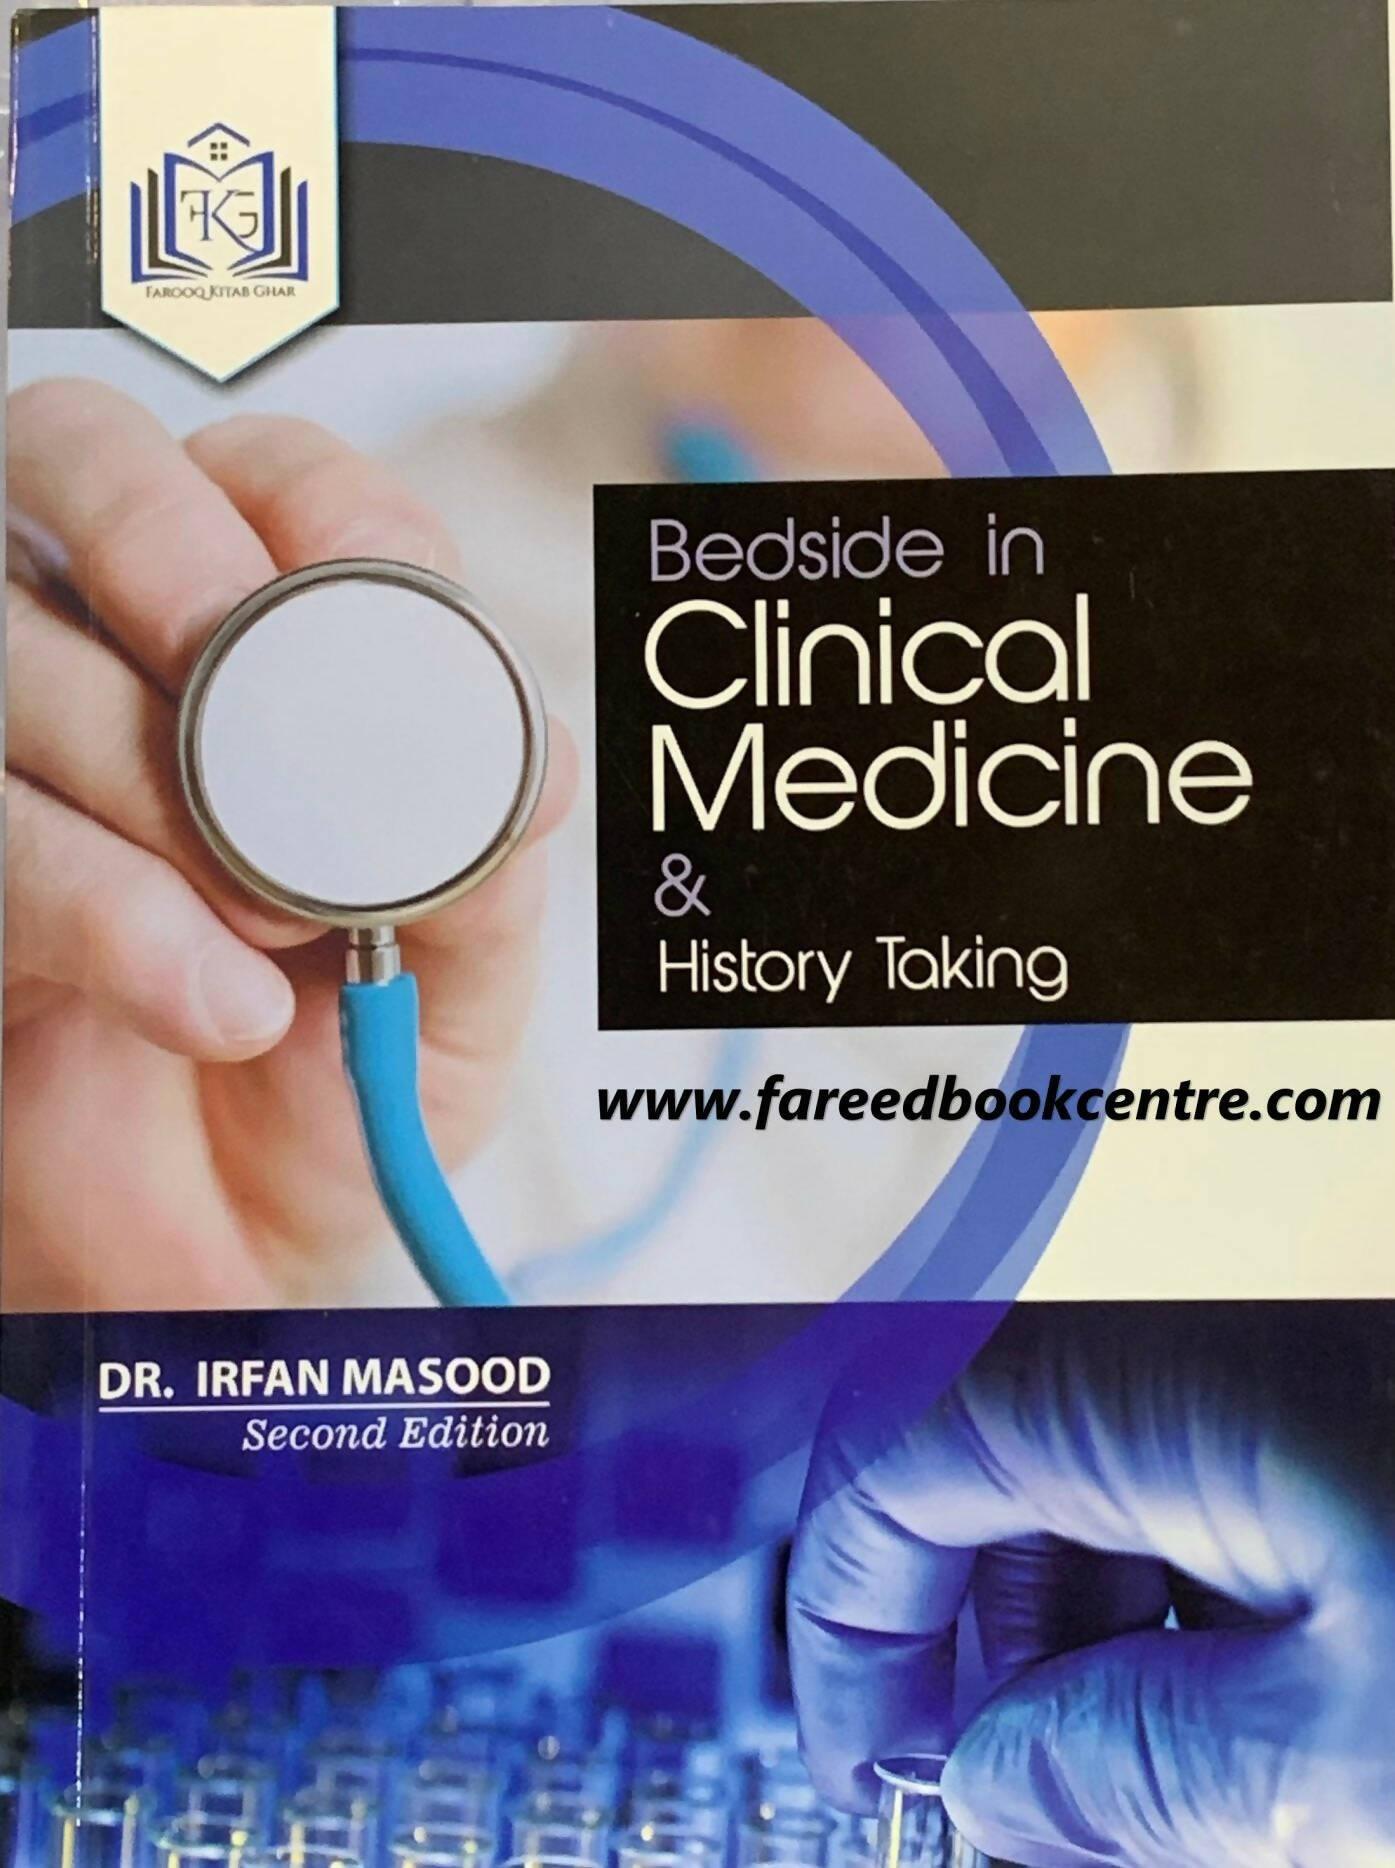 Bedside In Clinical Medicine & History Taking | Dr Irfan Masood 2nd Edition